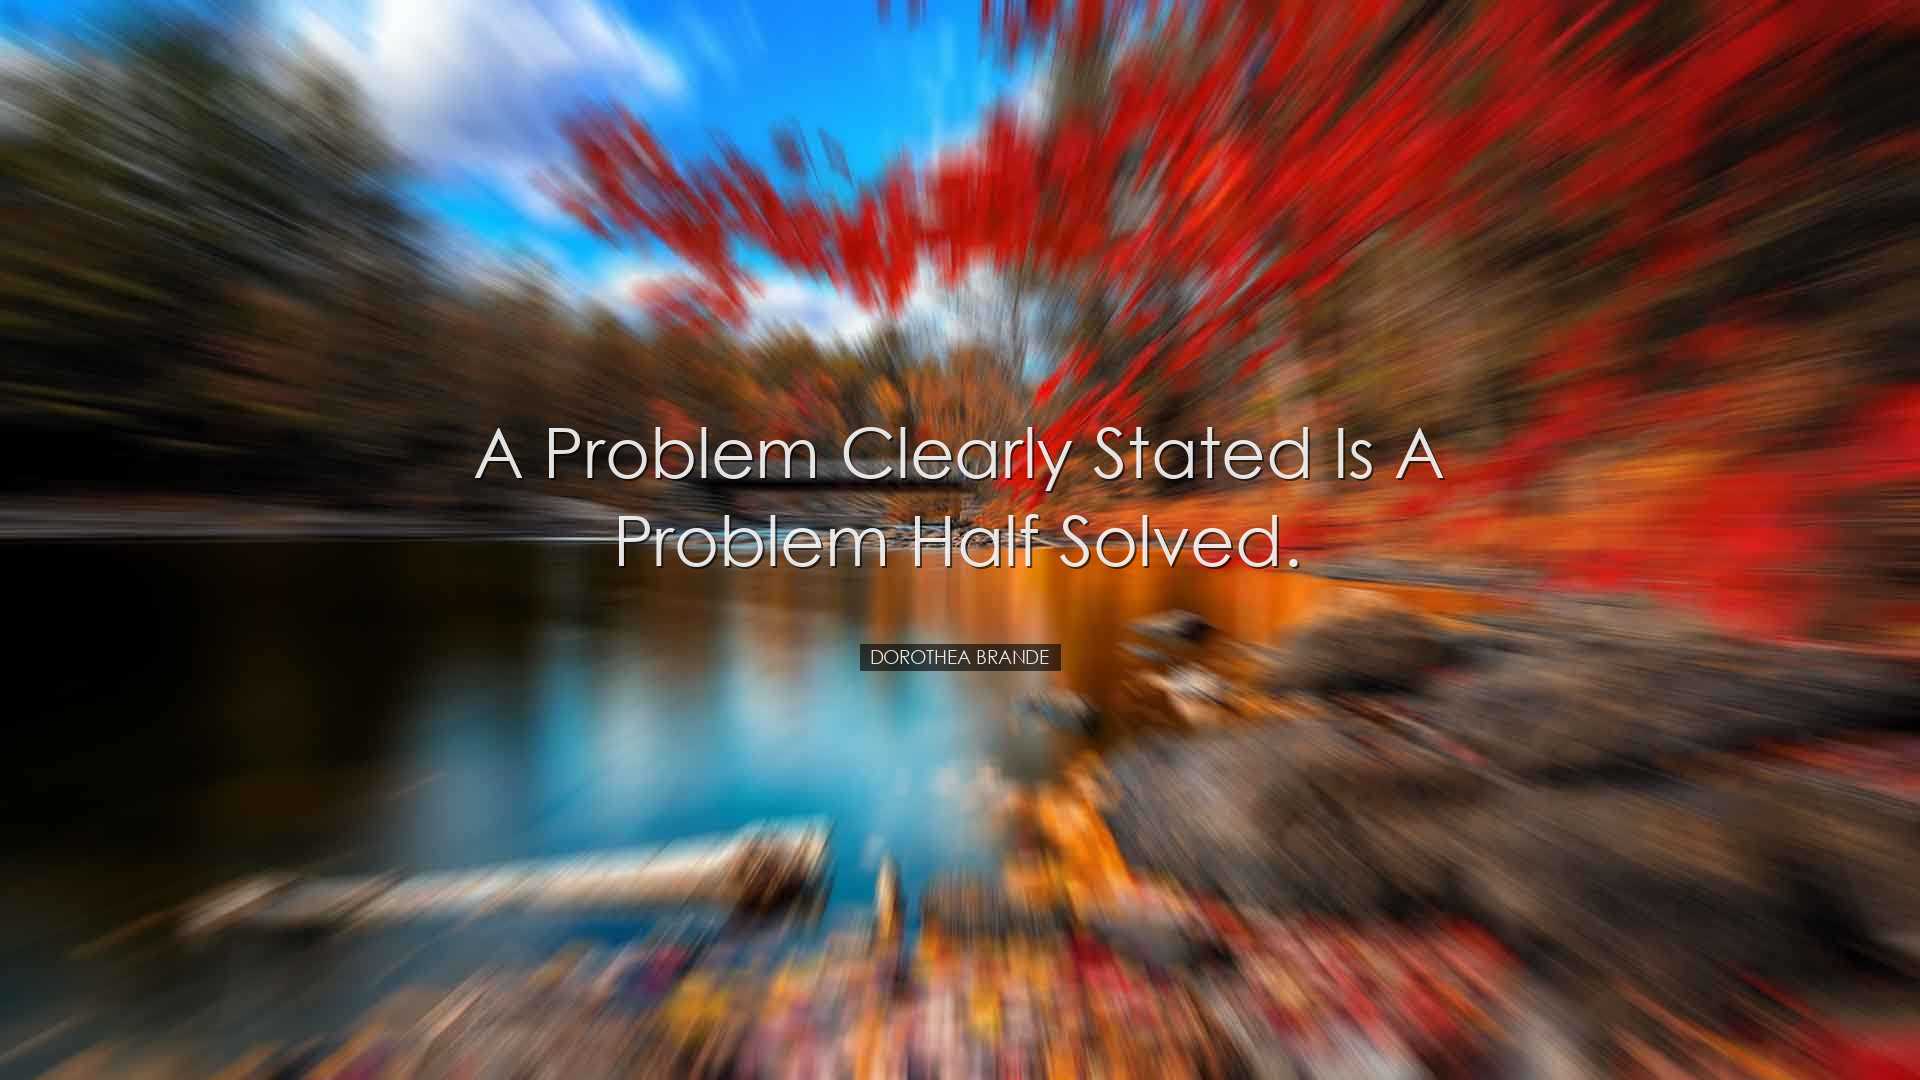 A problem clearly stated is a problem half solved. - Dorothea Bran